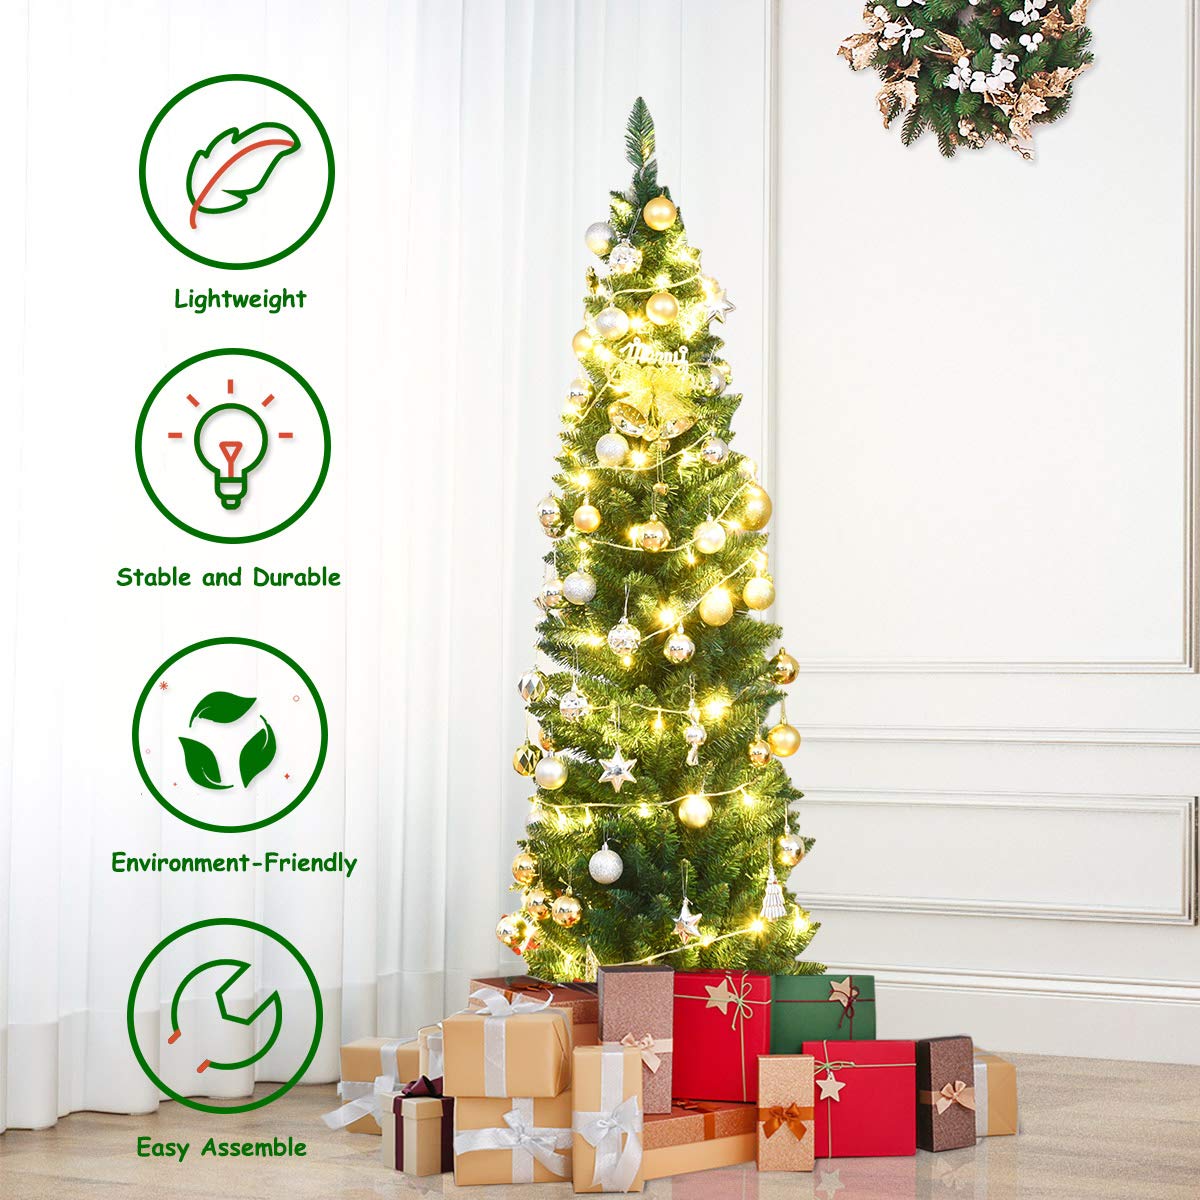 Classic Natural Christmas Tree, Foldable and Flexible Stand, PVC Plastic Thick Leaves, Traditional Indoor & Outdoor Decoration (Green) (1.8M)